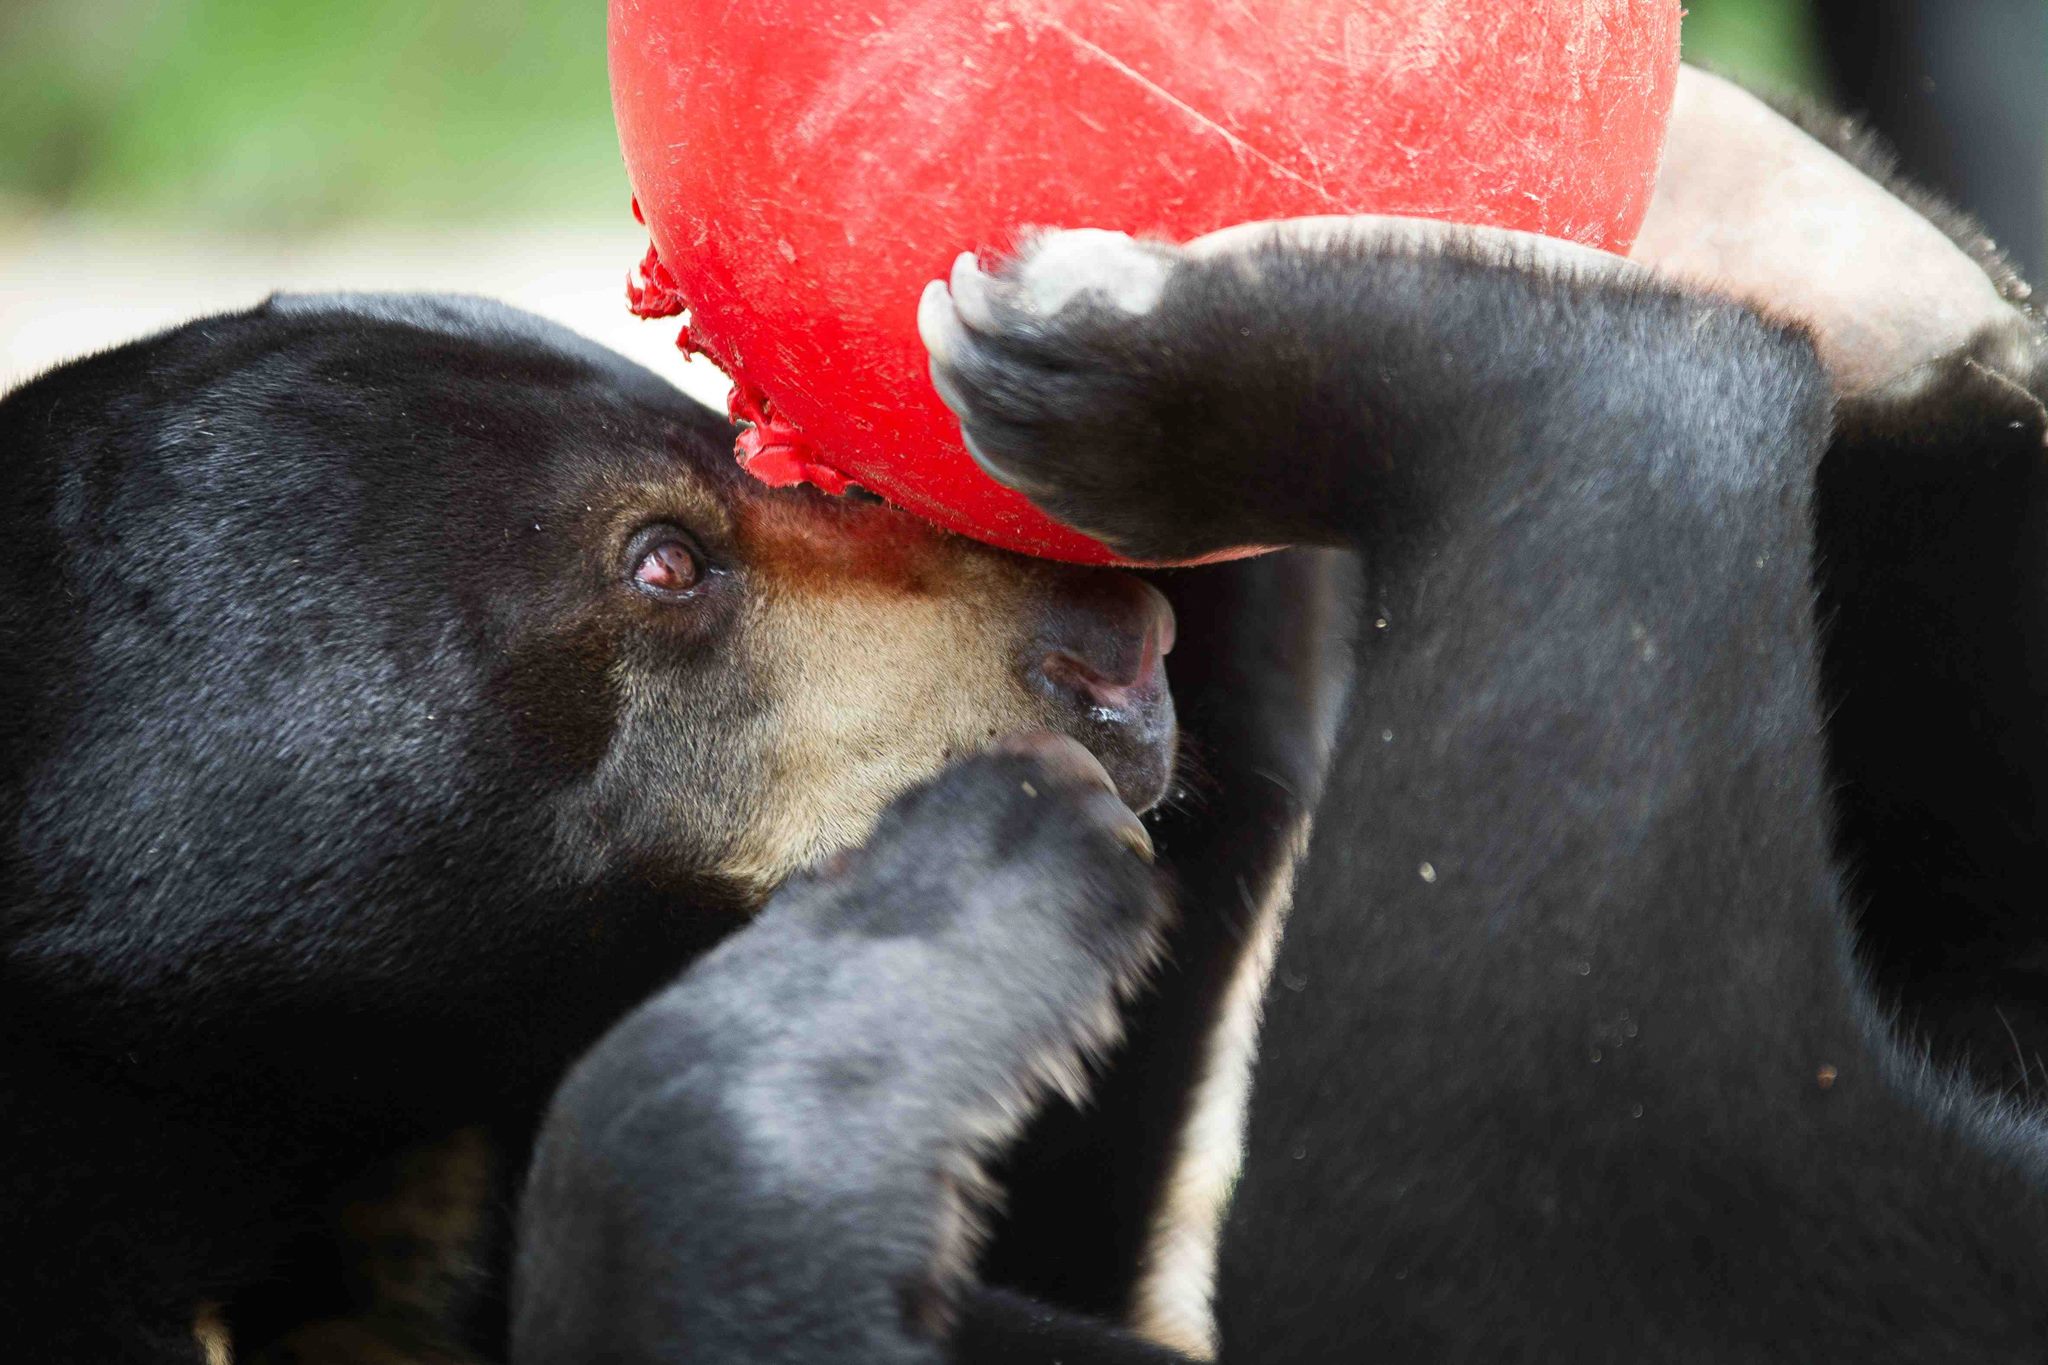 A rescued bear plays in an animal sanctuary. Photo by Peter Yuen